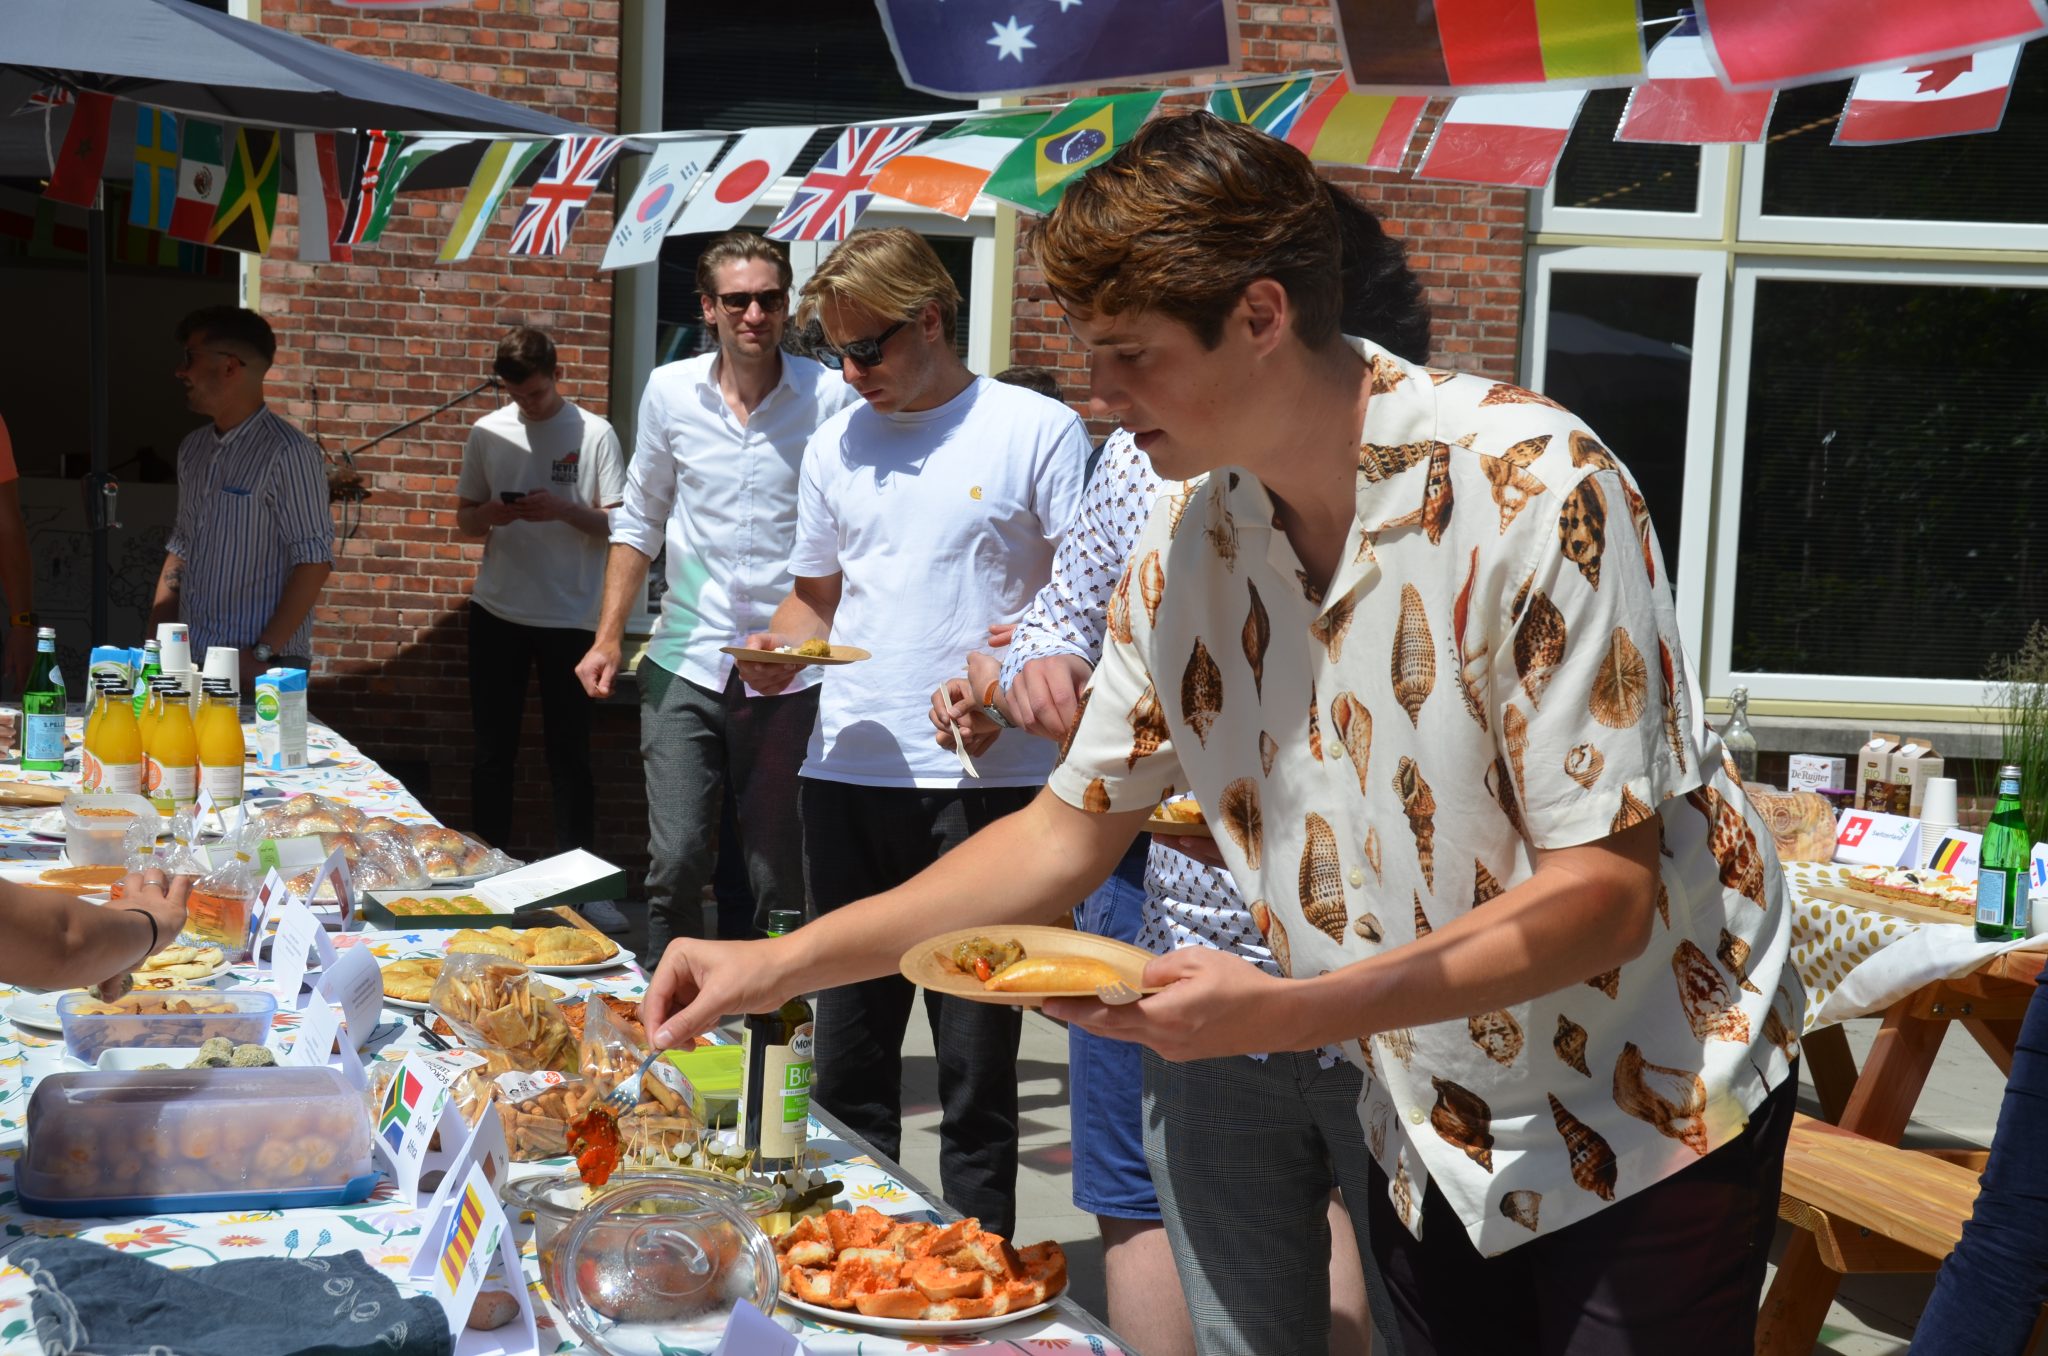 A person getting food at the outdoor party.